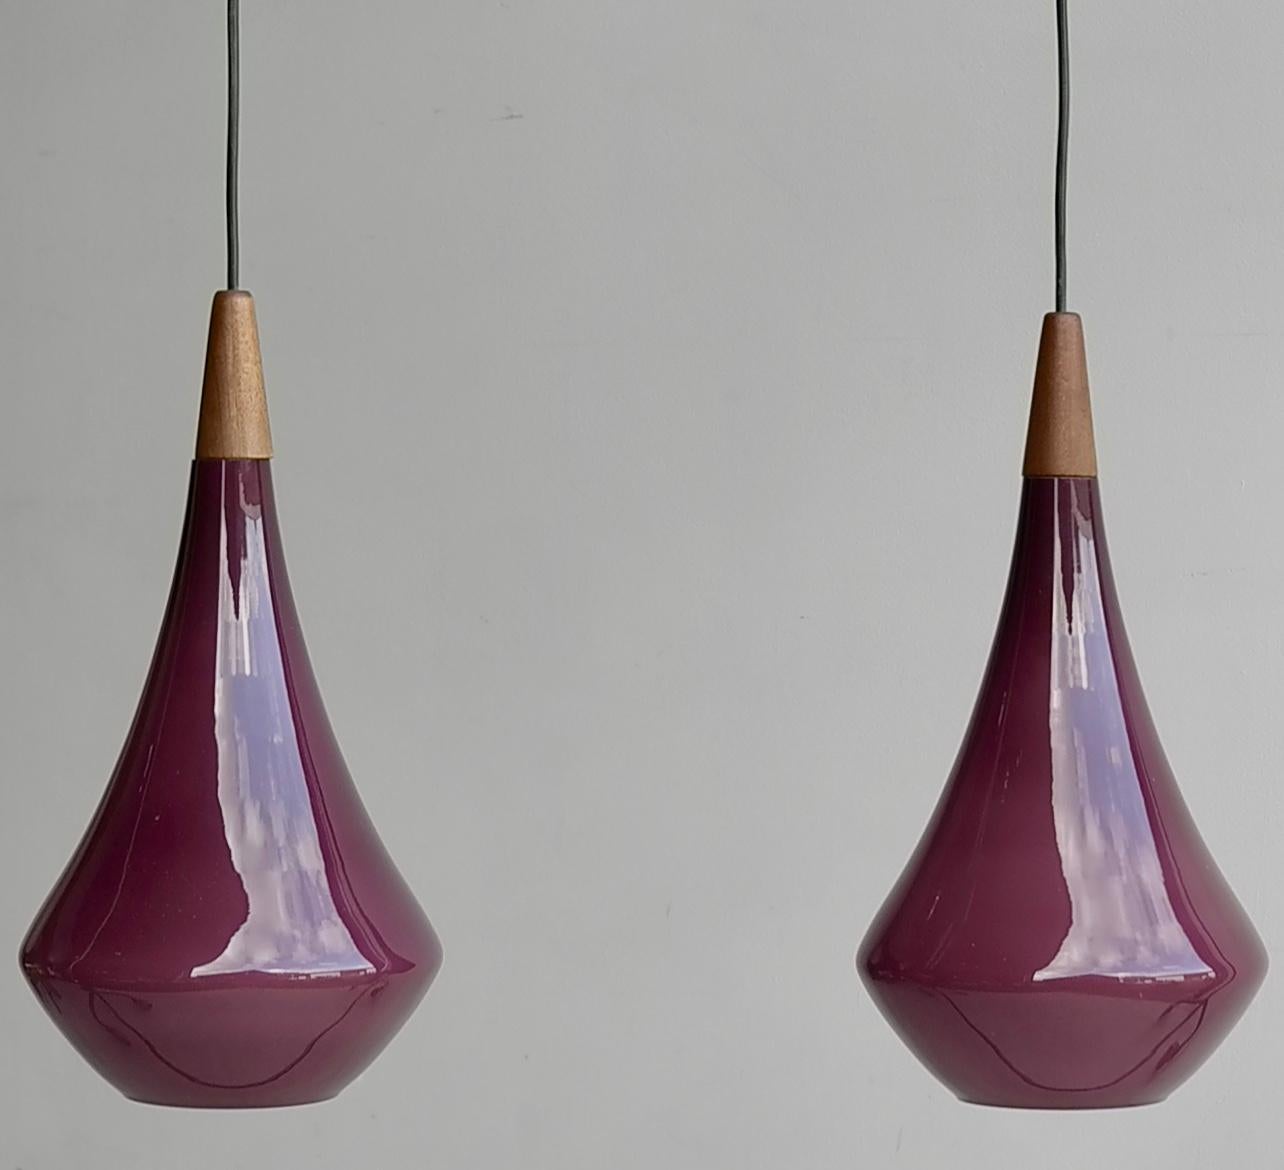 Pair of Purple Glass 'Drop' pendant lamps by Holmegaard Kastrup, Denmark 1960's

All Holmegaard glass is manual made, lovely finished with Teak ends.